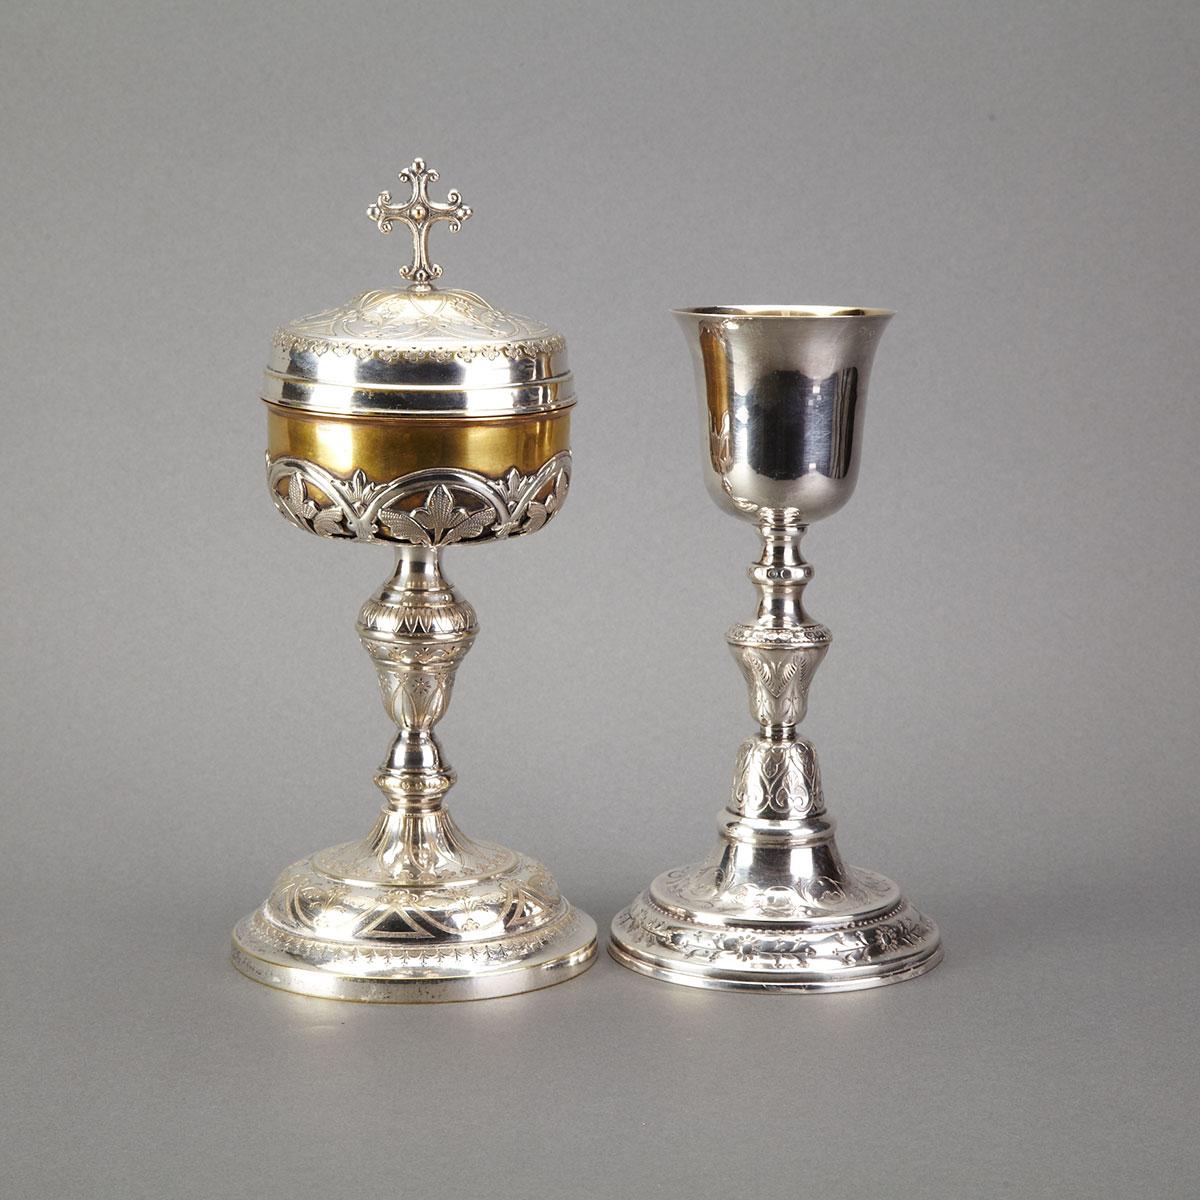 French Aesthetic Movement Silver Plate Chalice and Ciborium, late 19th century